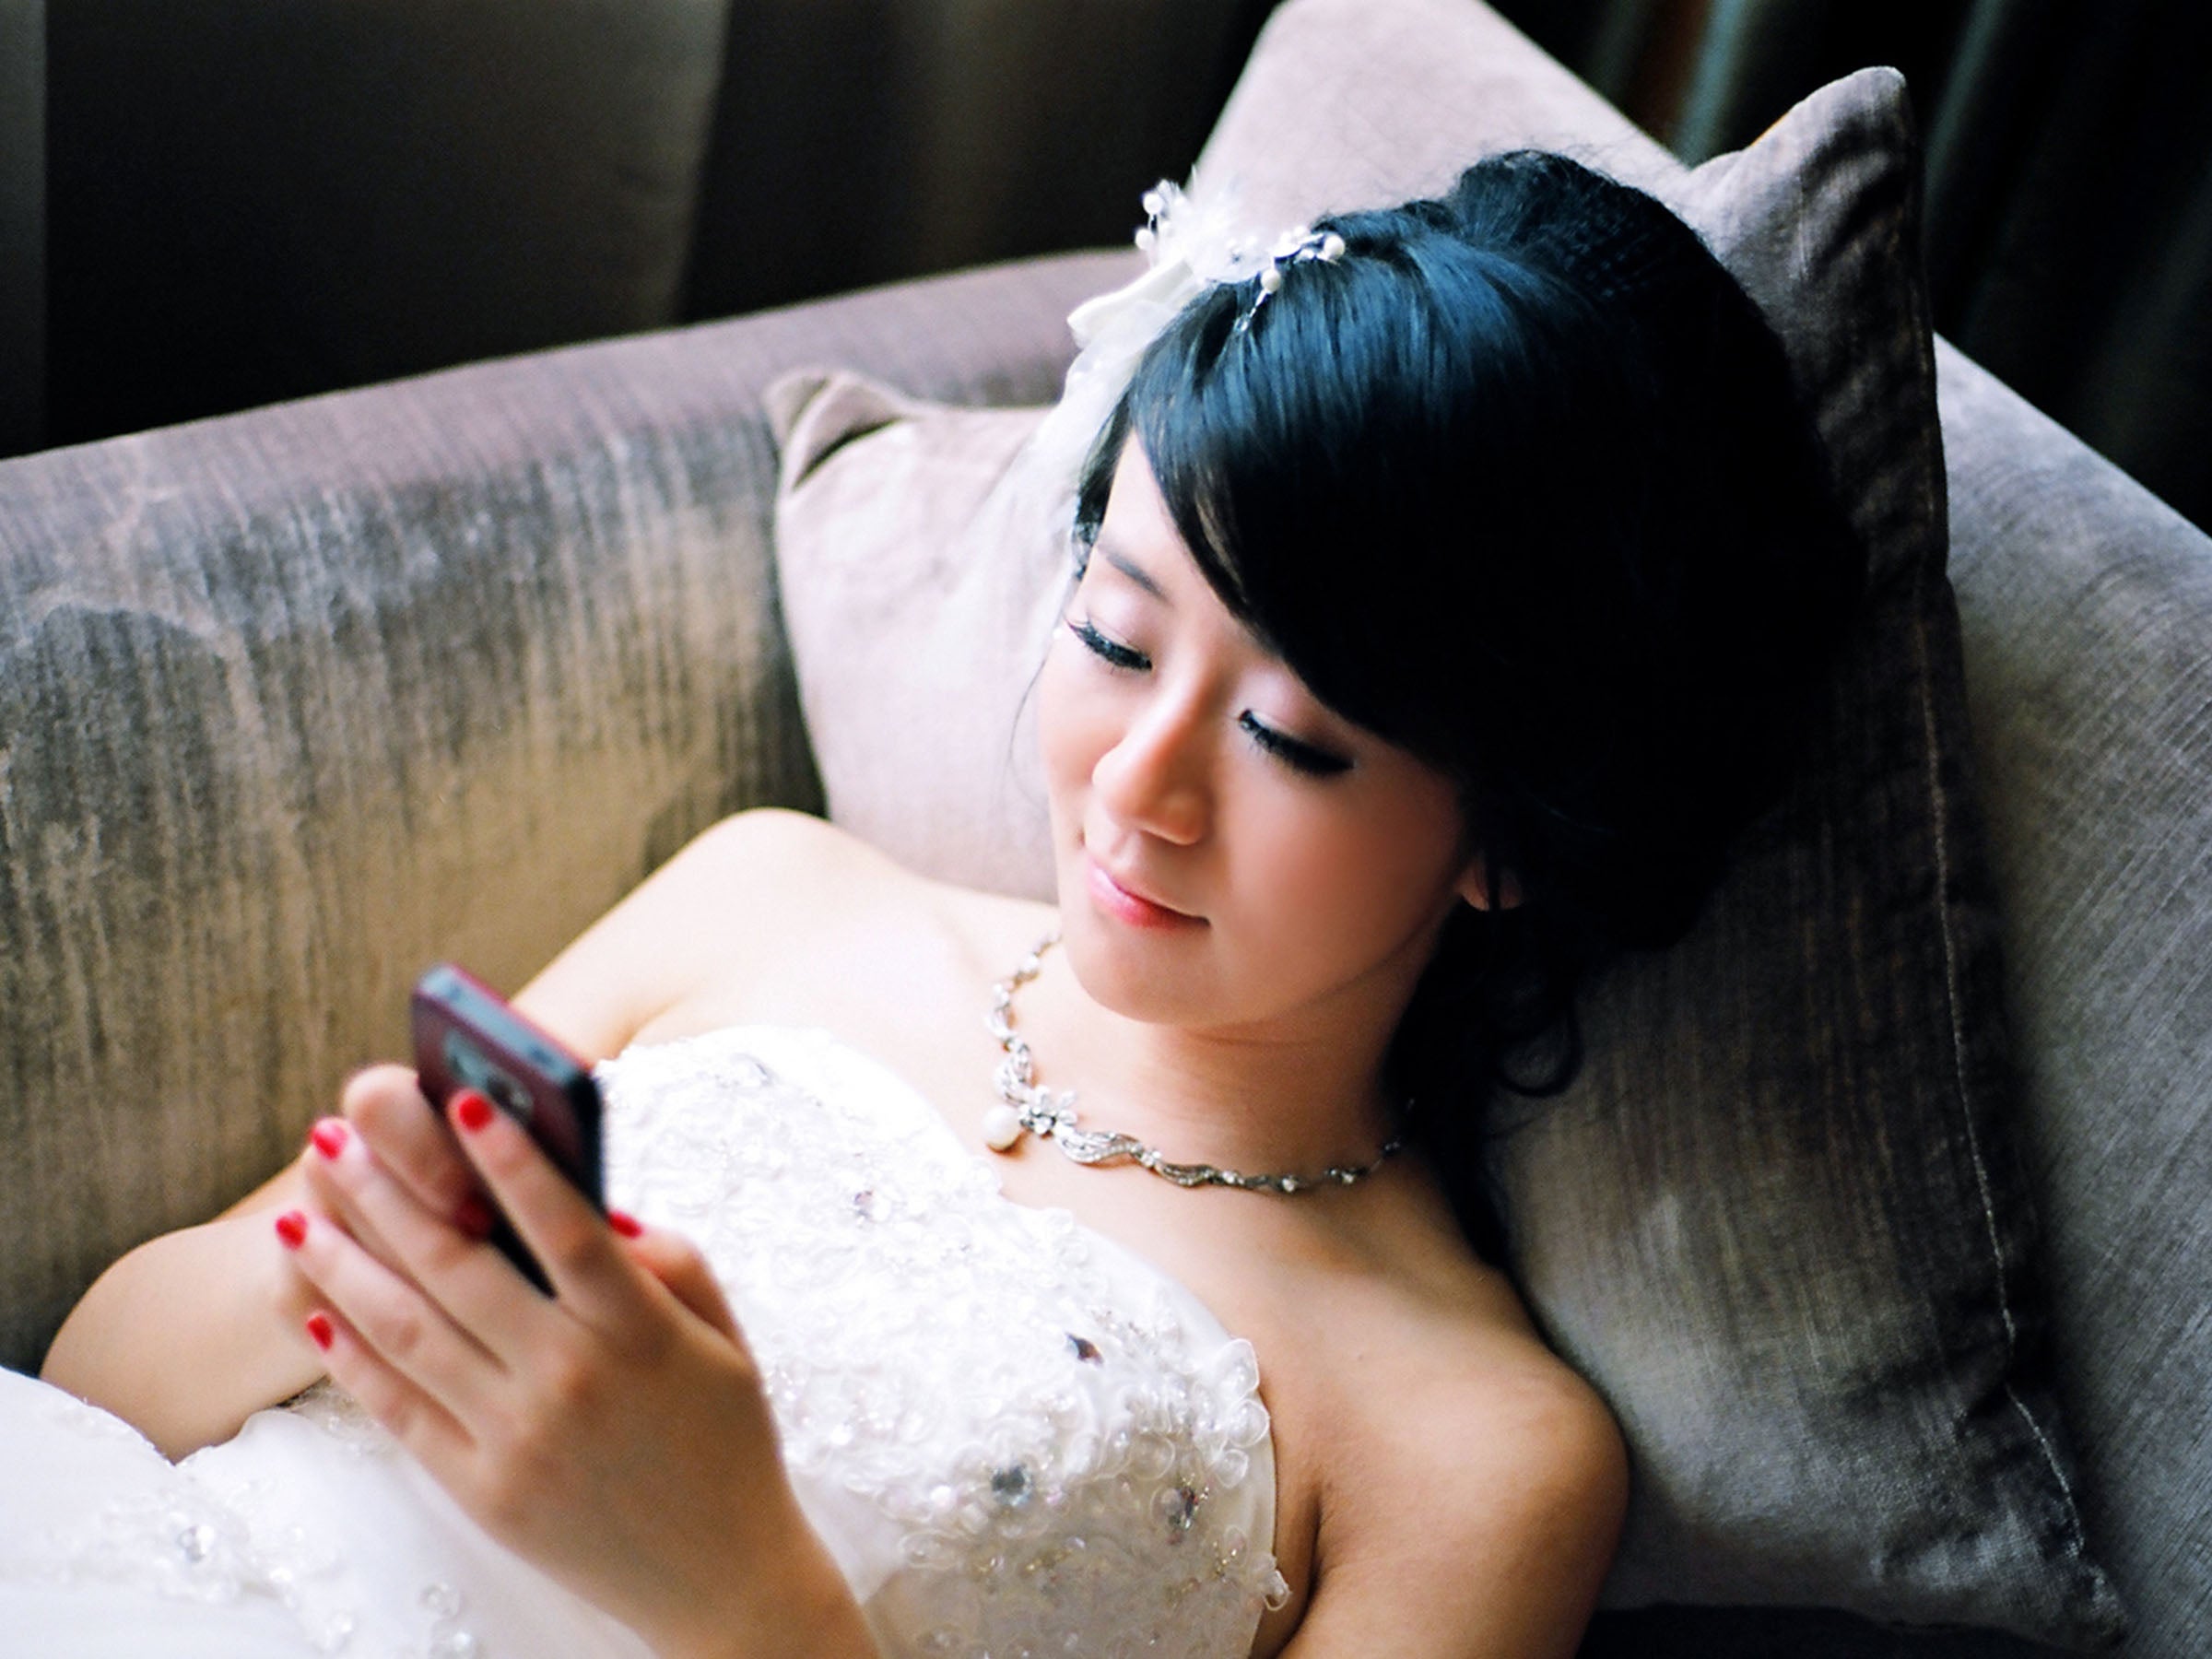 A couple in Jeddah divorced after the bride refused to stop using her phone on wedding night